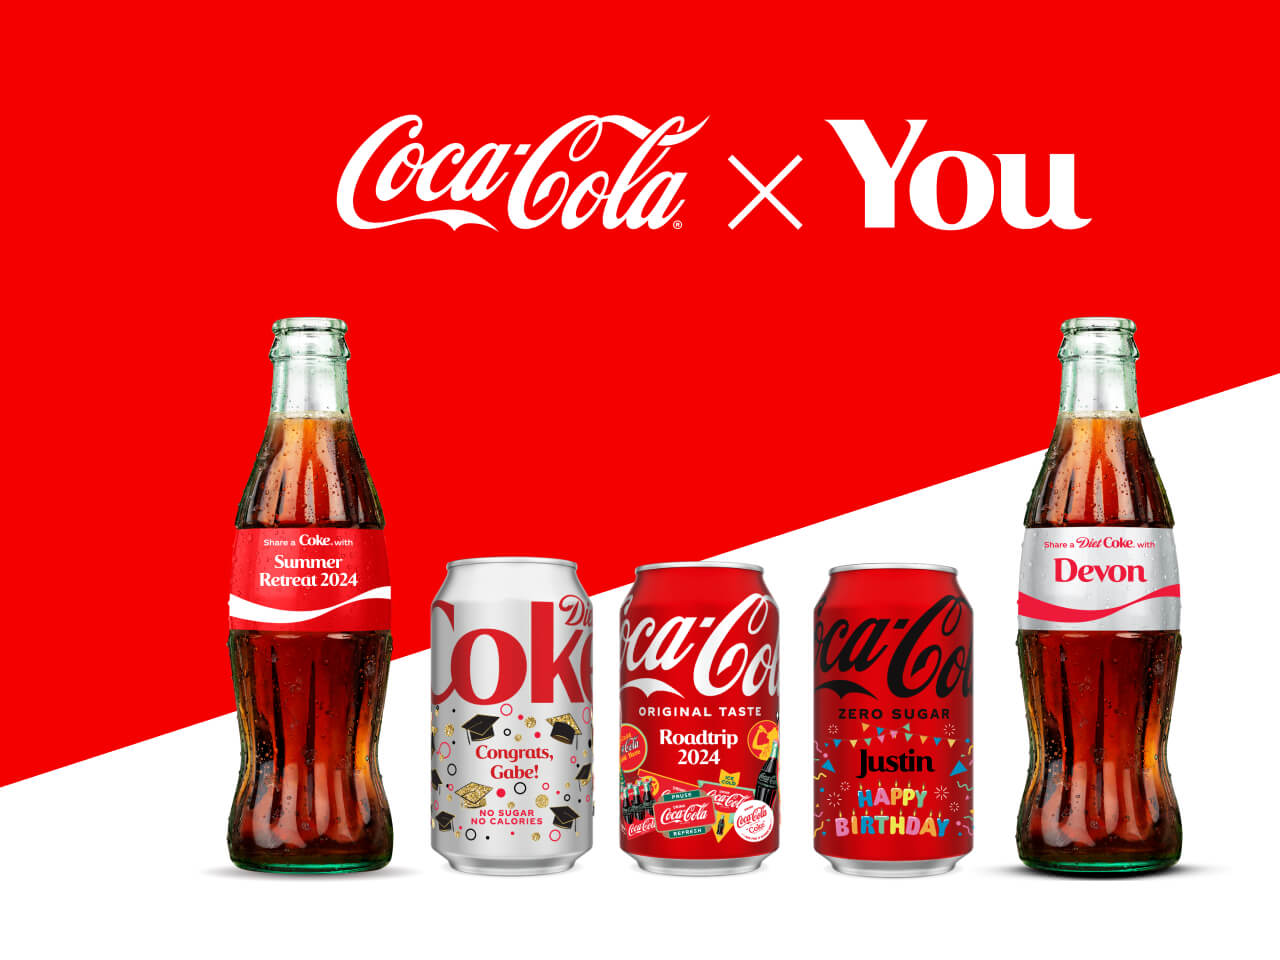 a line up of Coca-Cola cans and bottles cutomized for events including graduation, birthdays, and retreats